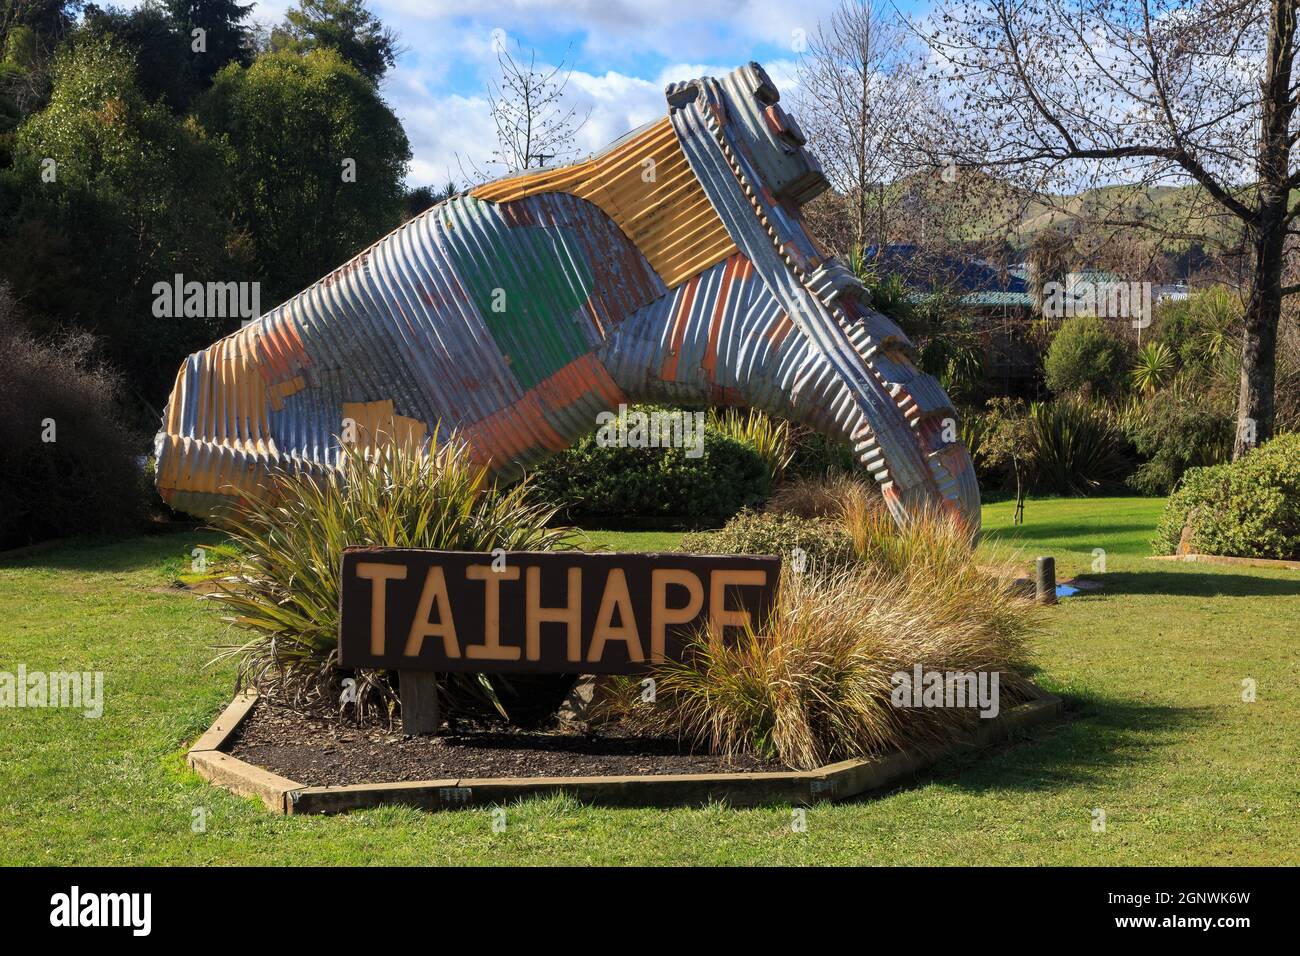 A giant corrugated iron gumboot sculpture outside the town of Taihape, the 'gumboot capital of New Zealand' Stock Photo